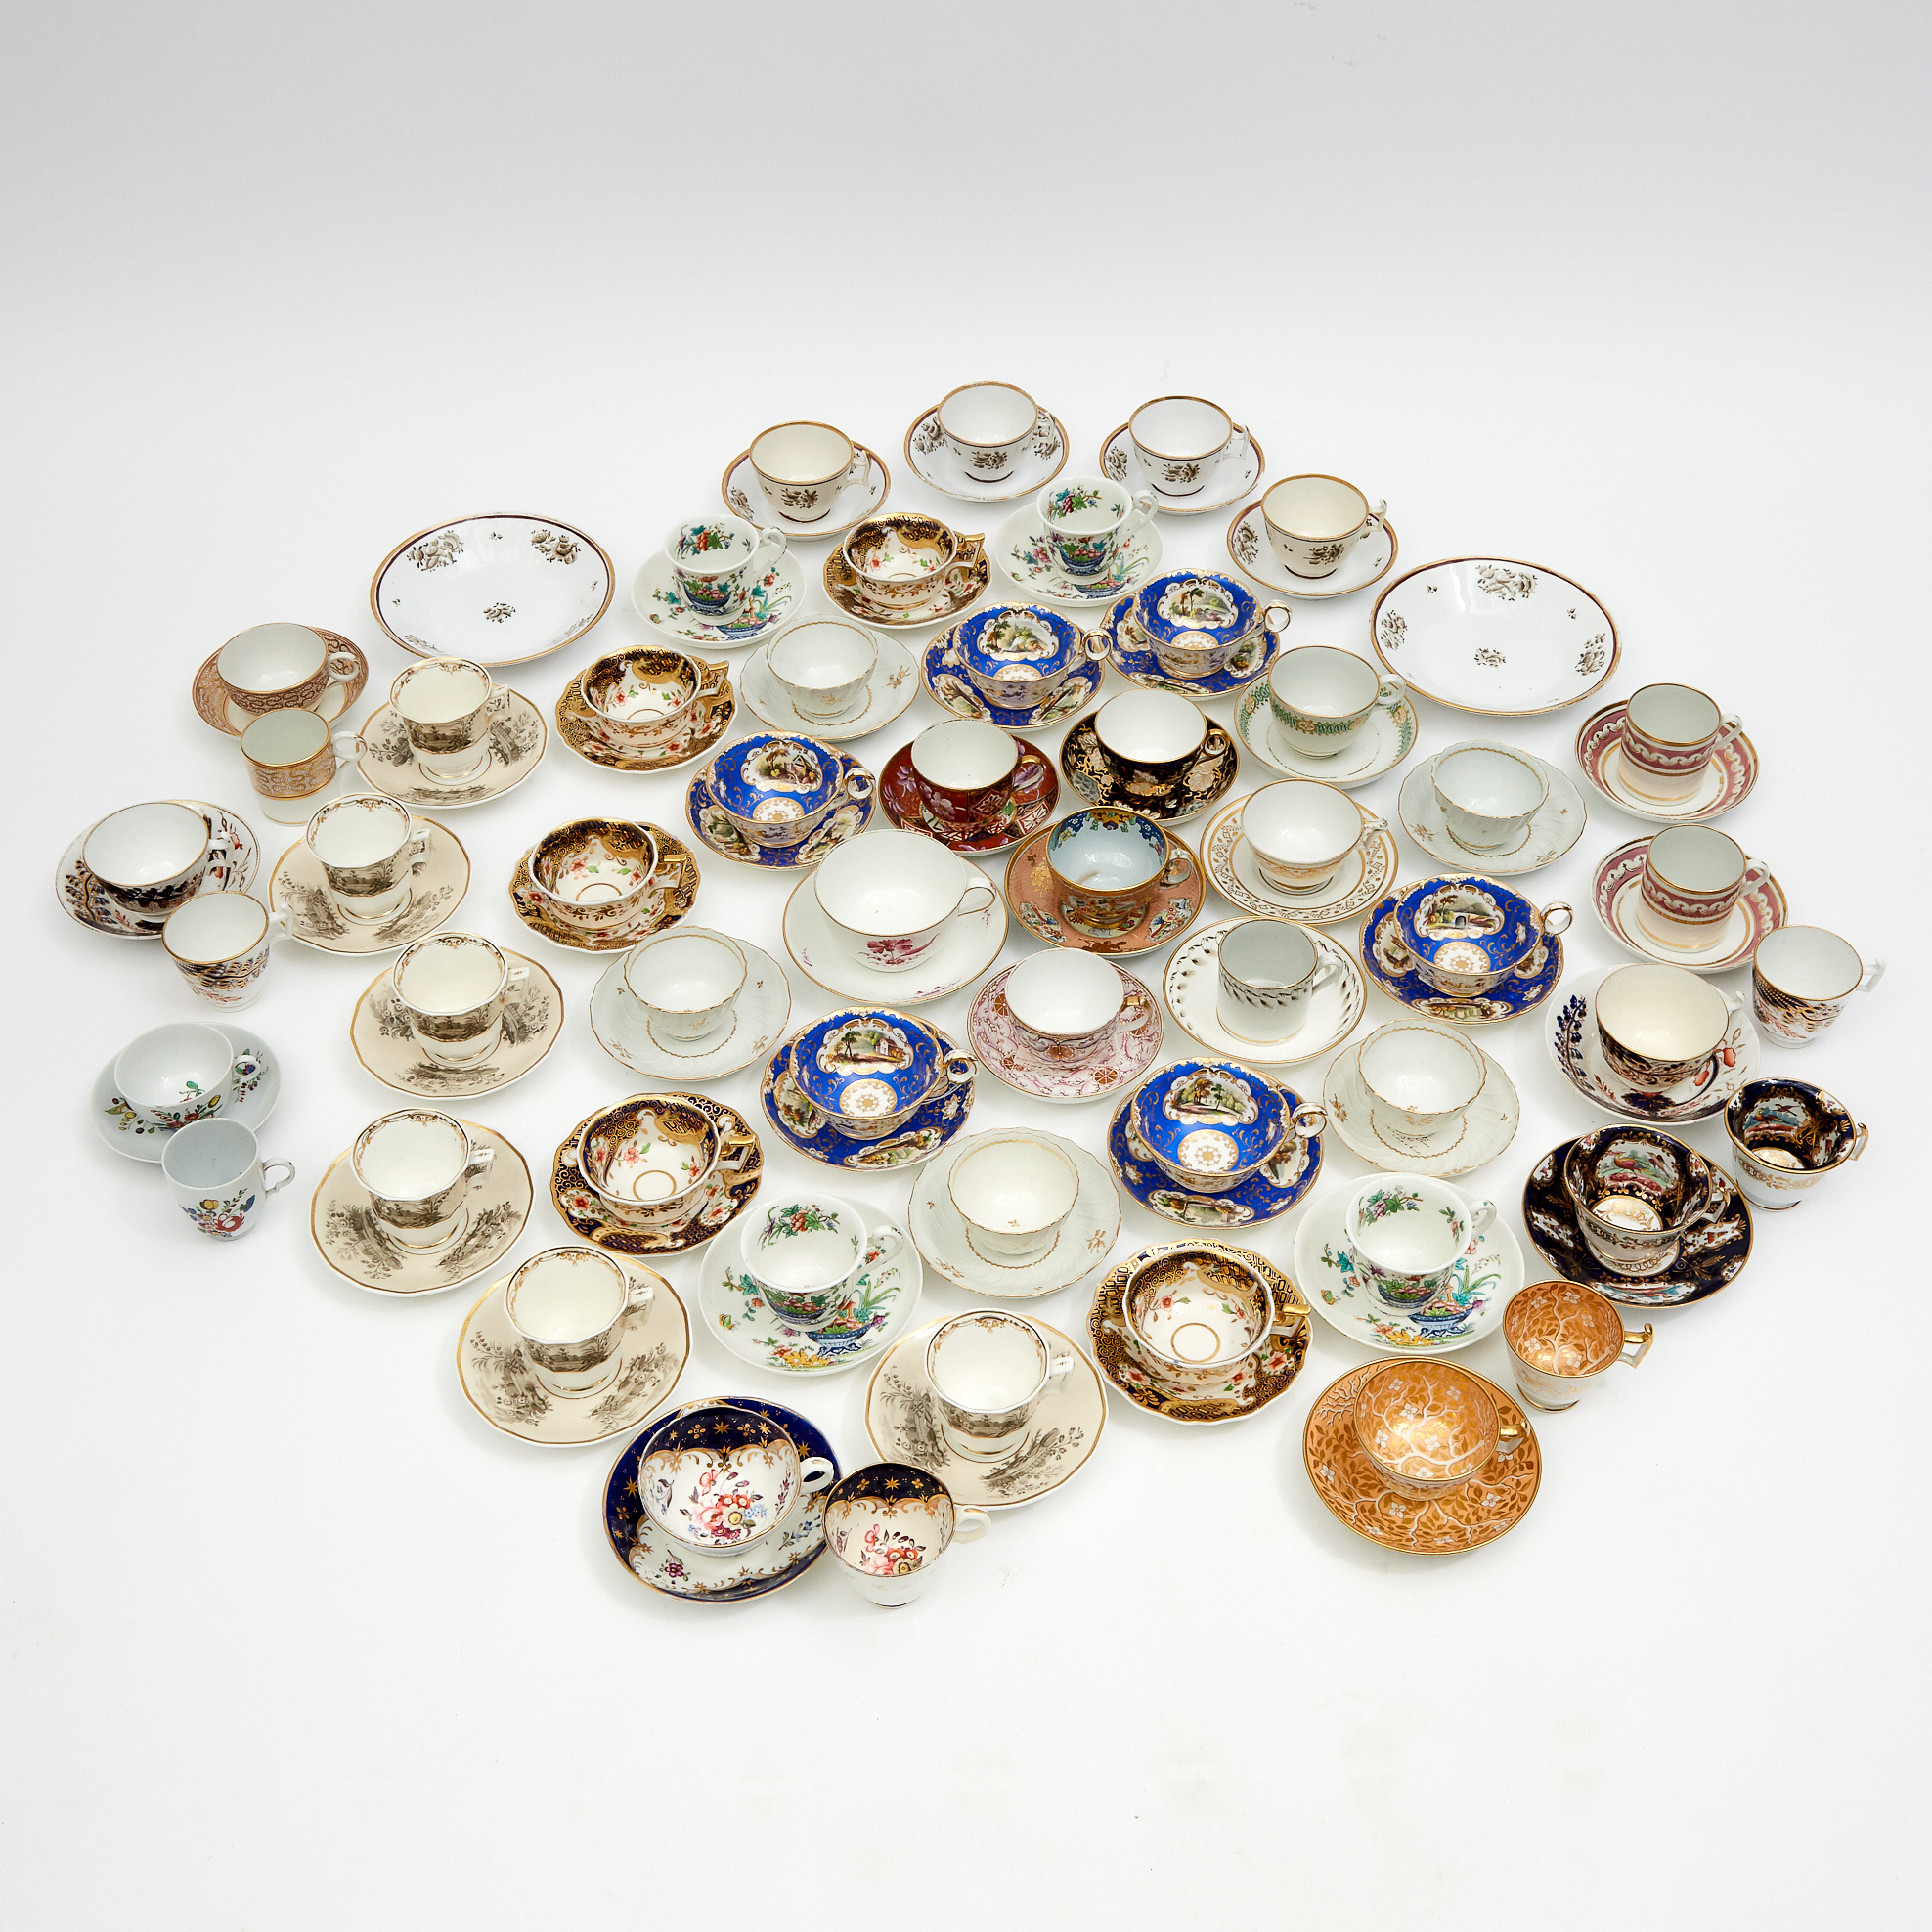 Forty Various English Porcelain Cups and Saucers, Seven Trios and Two Saucer Dishes, 19th century